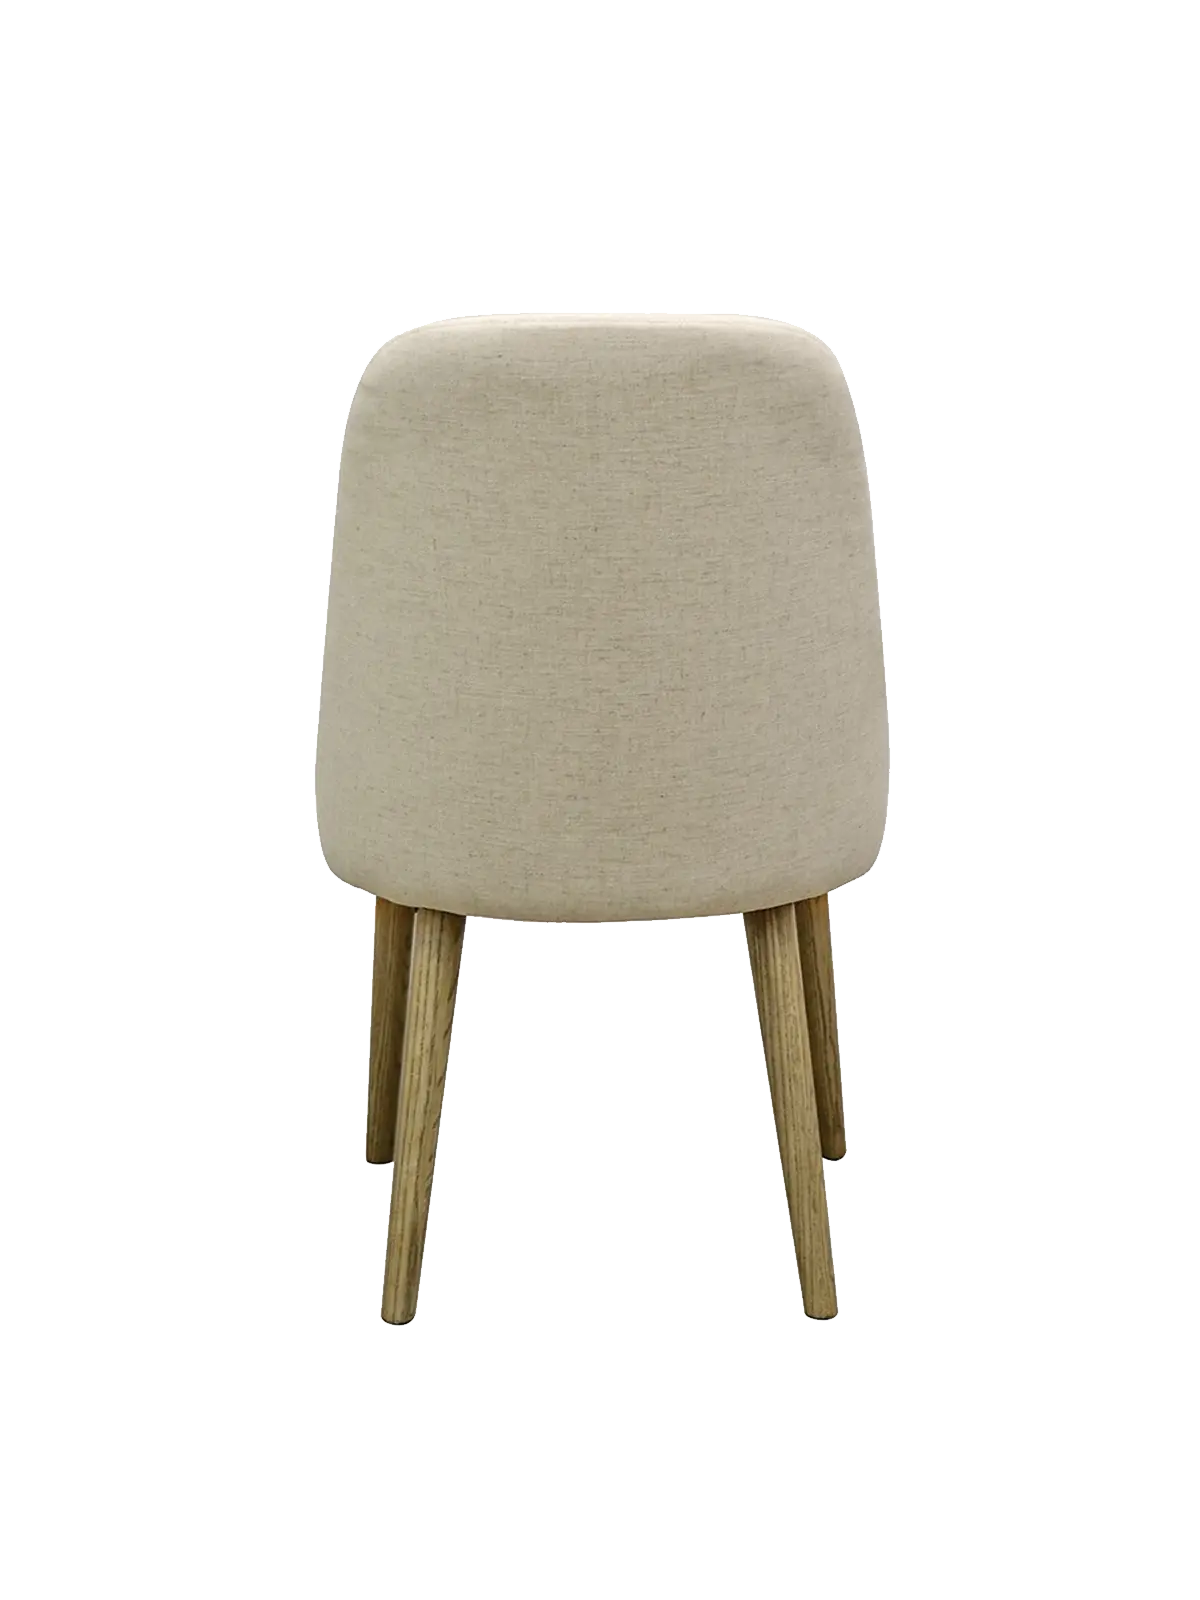 Genoa Natural Linen Dining Chair Hawthorne Group